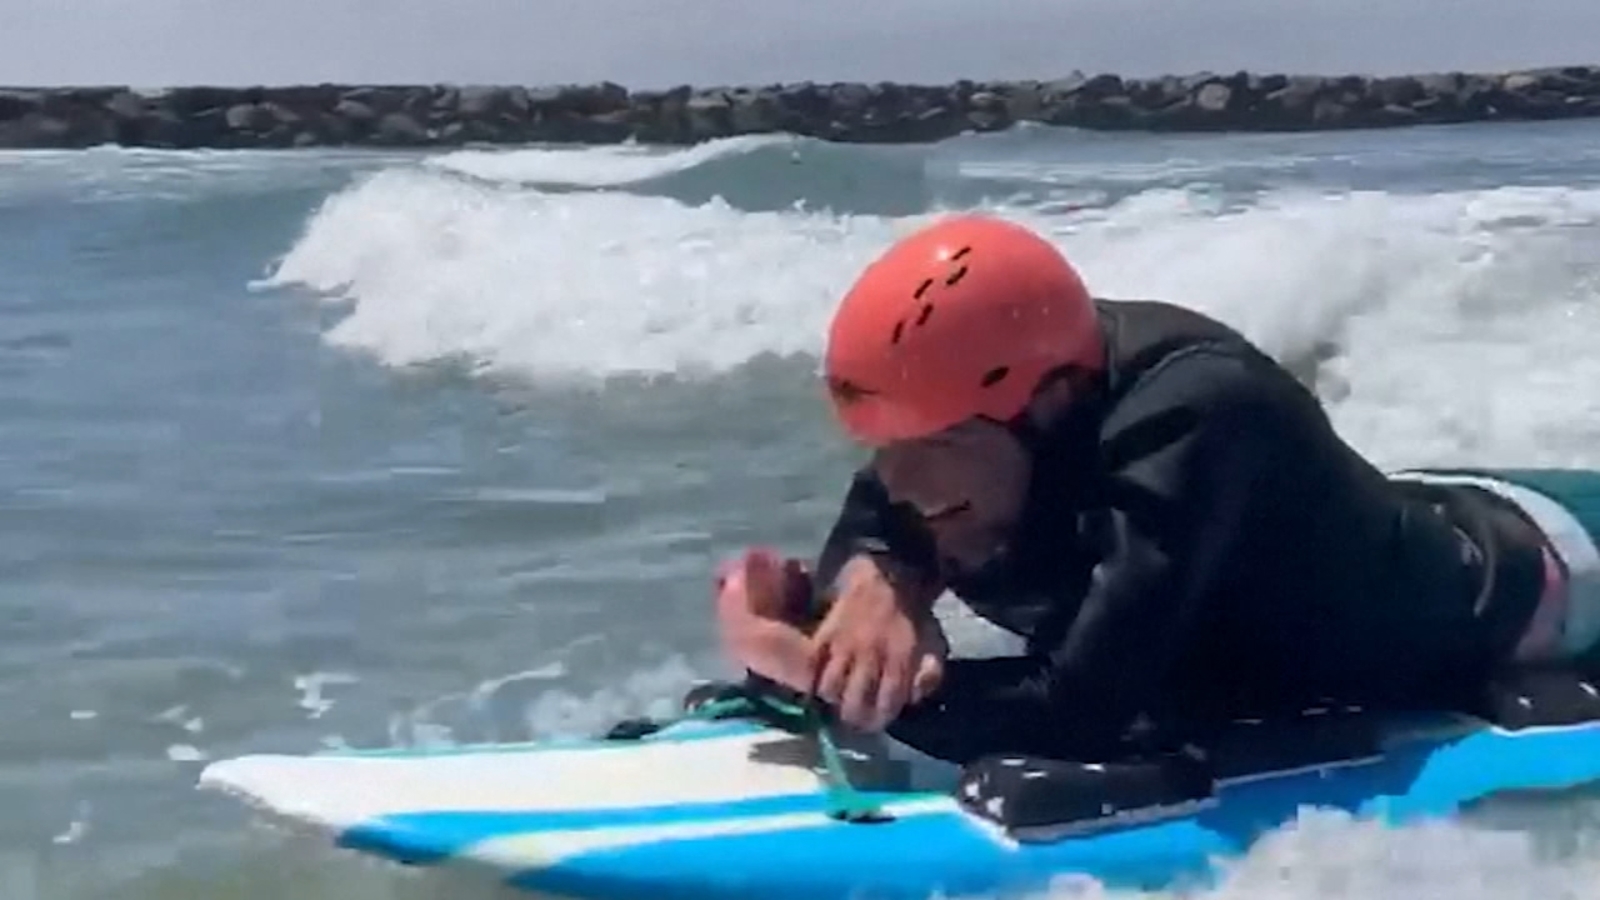 California man Collin Bosse goes surfing again after suffering terrible spinal injury that left him paralyzed [Video]